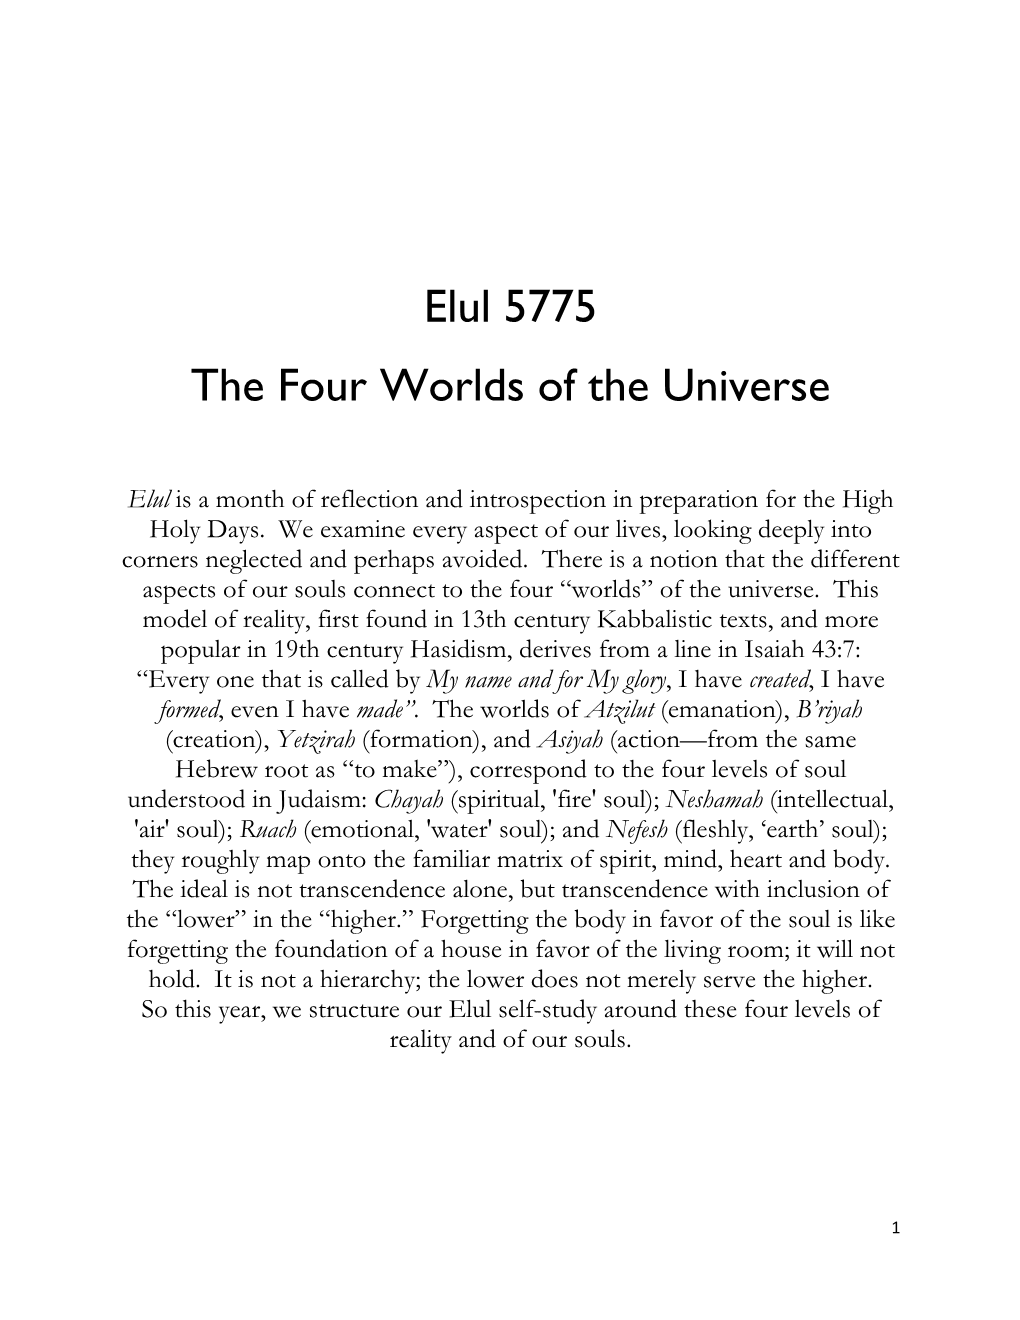 Elul 5775 the Four Worlds of the Universe